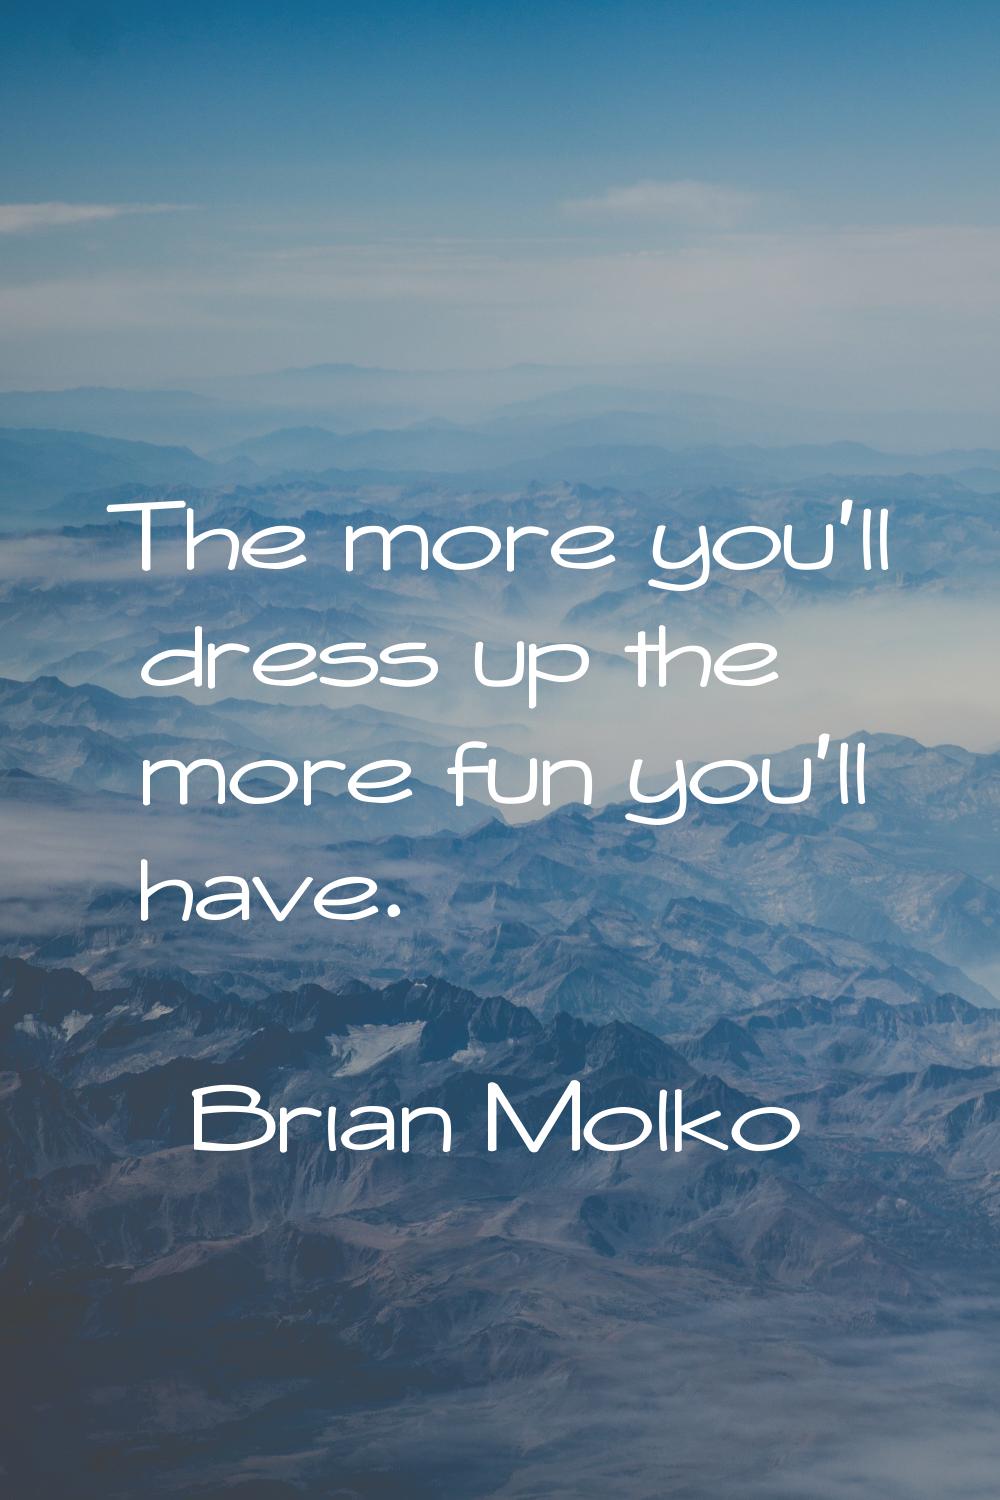 The more you'll dress up the more fun you'll have.